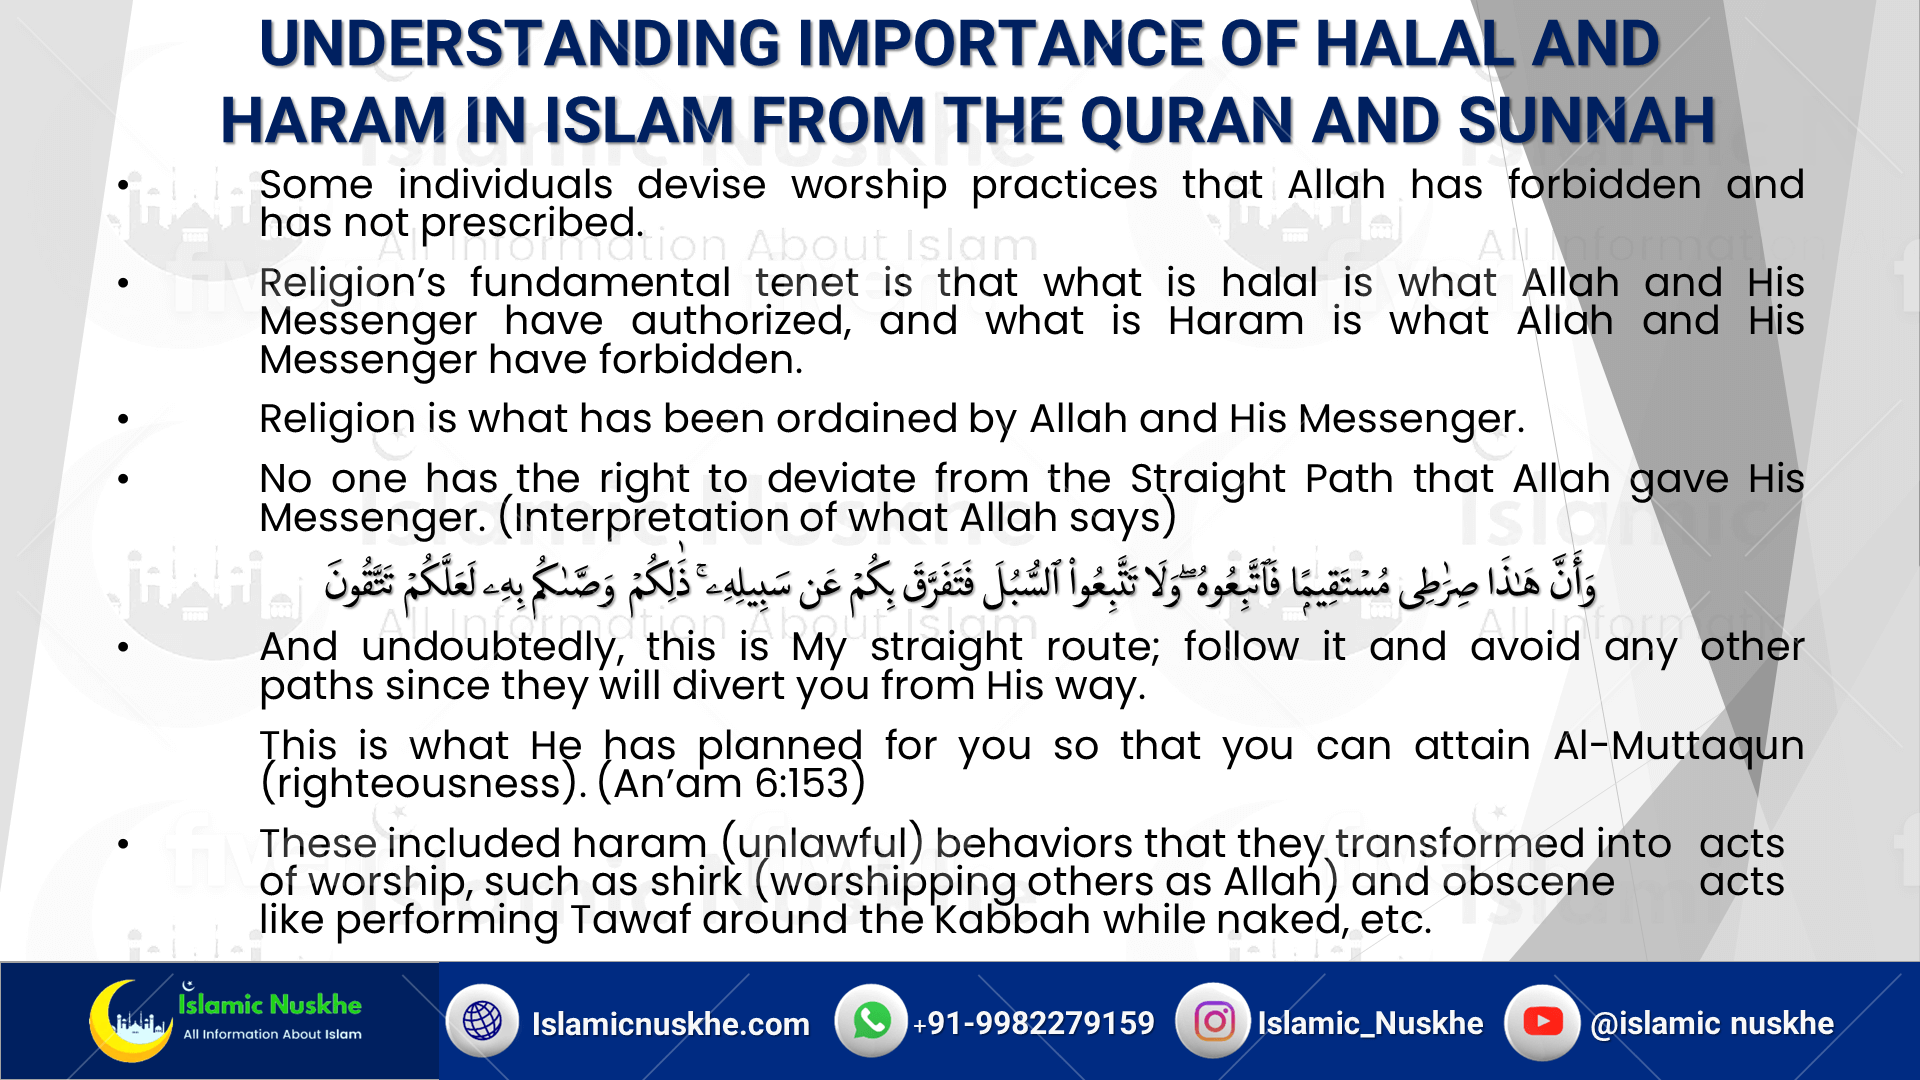 IMPORTANCE OF HALAL AND HARAM IN ISLAM